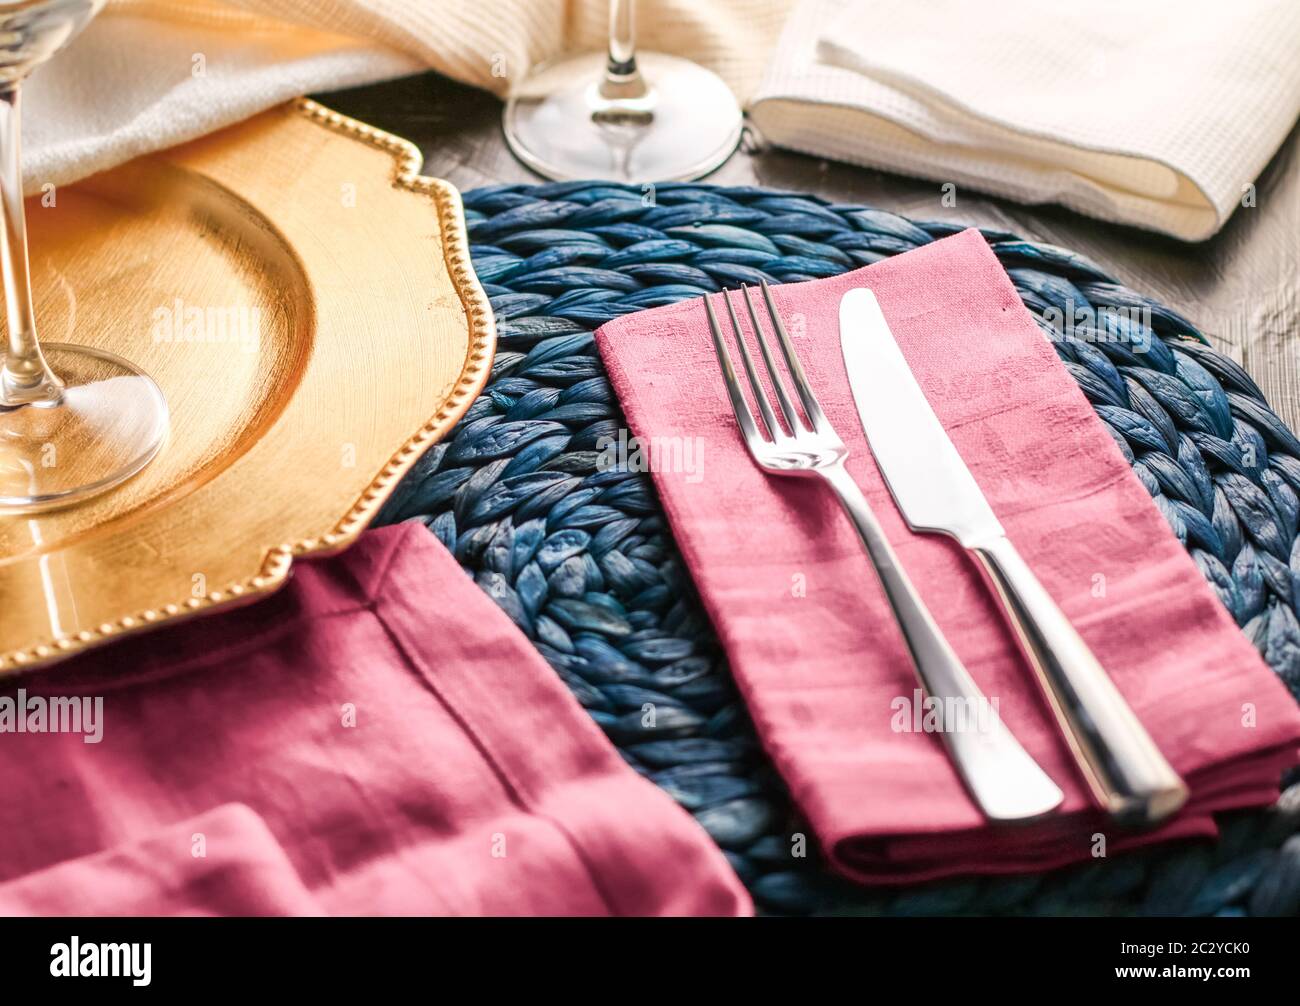 Holiday table setting with pink napkin and silver cutlery, food styling props, vintage set for wedding, event, date, party or lu Stock Photo